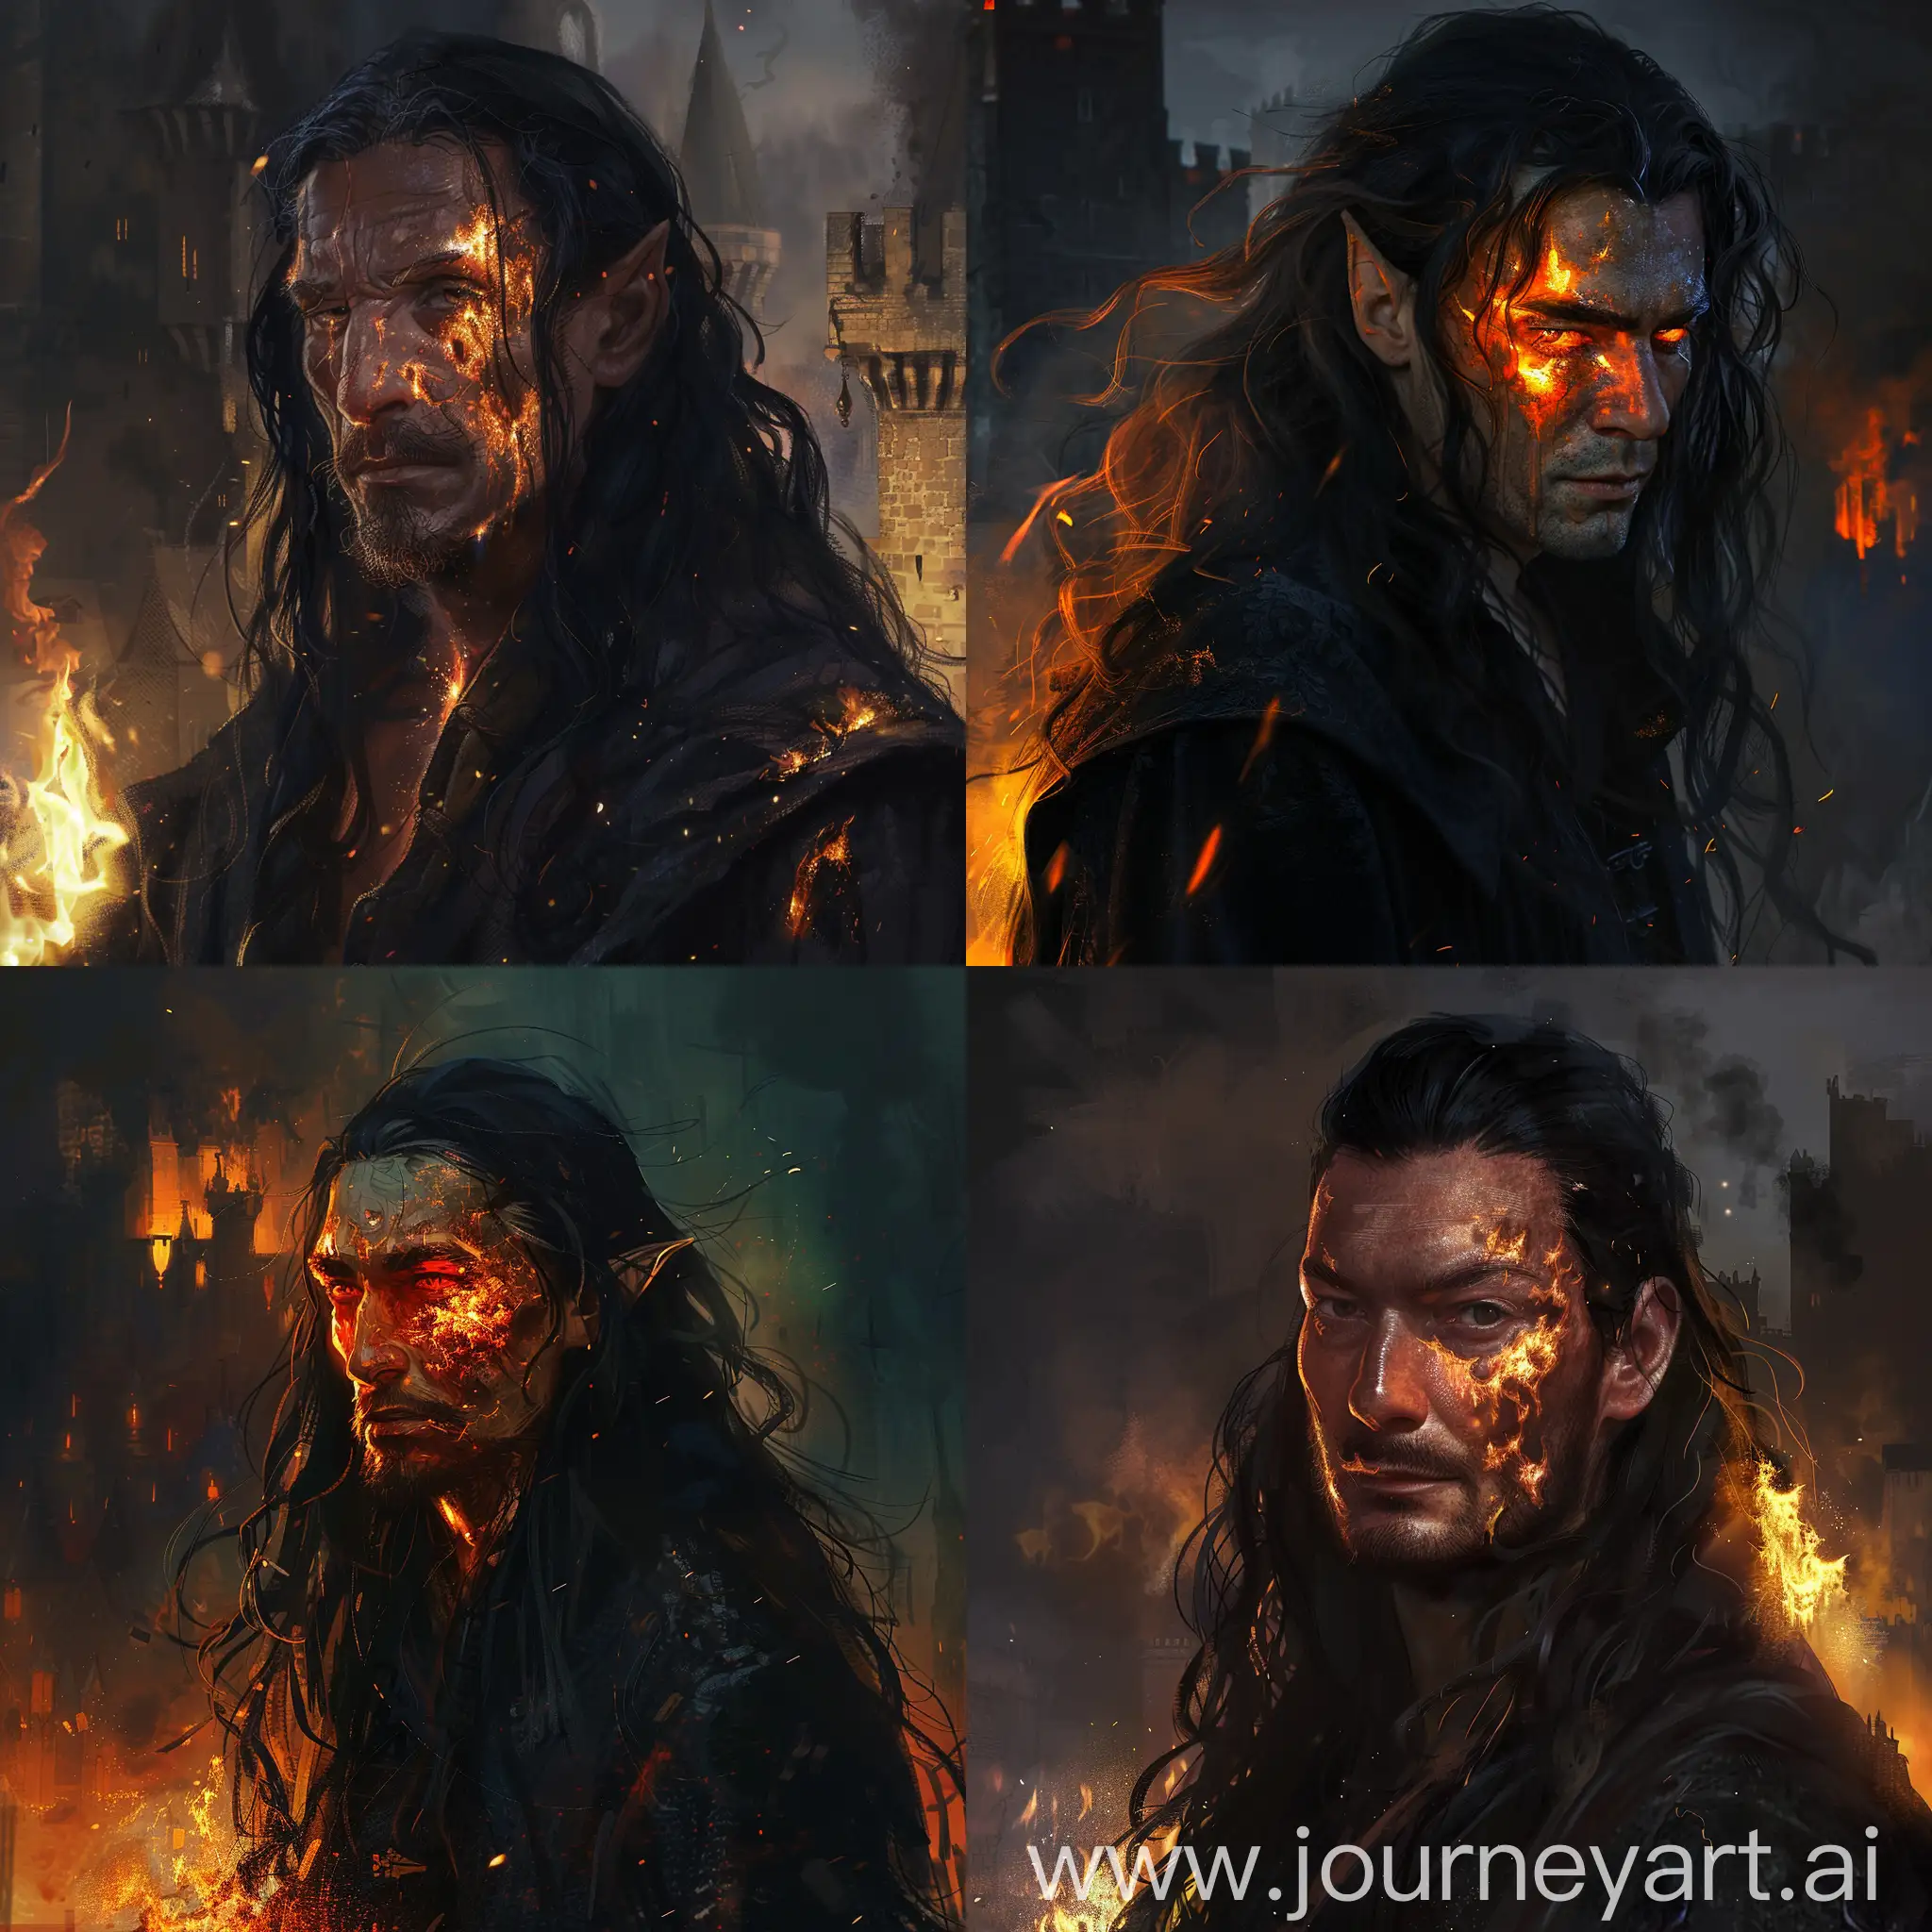 he is one of the commander of raven lock guild.He has a long black hair and doesn't have any beard.He is wearing a rob that is black.His face is burnt by flames.There is castle ambience behind him.